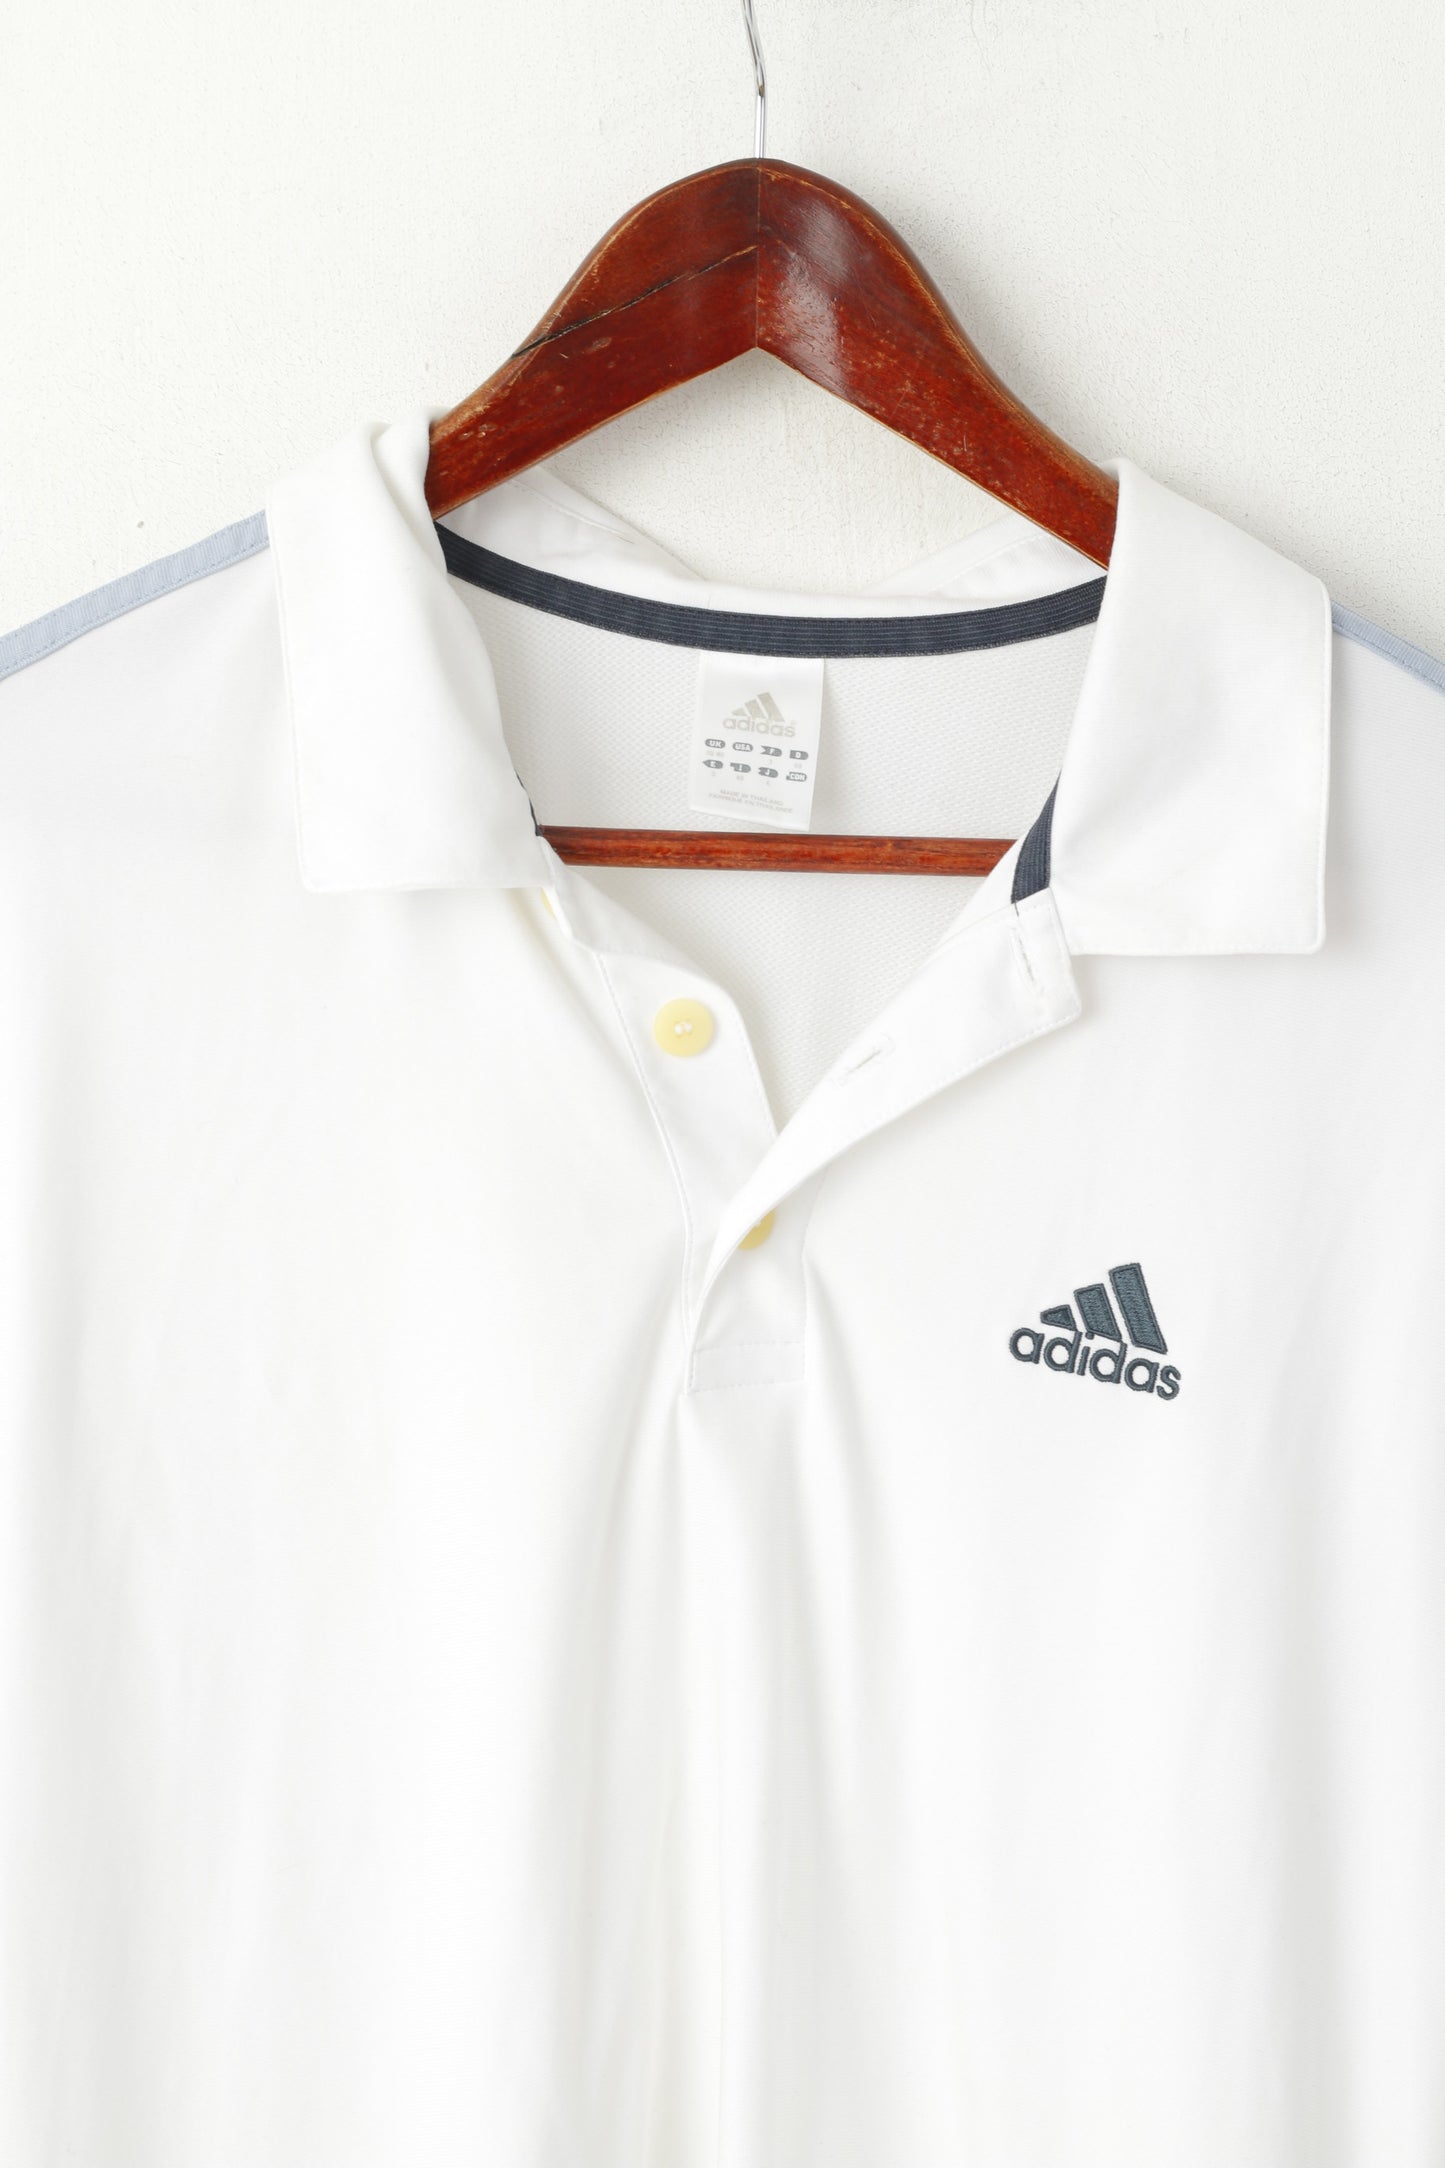 Adidas Hommes L Polo Blanc Formation Activewear Vintage Sport Jersey Top